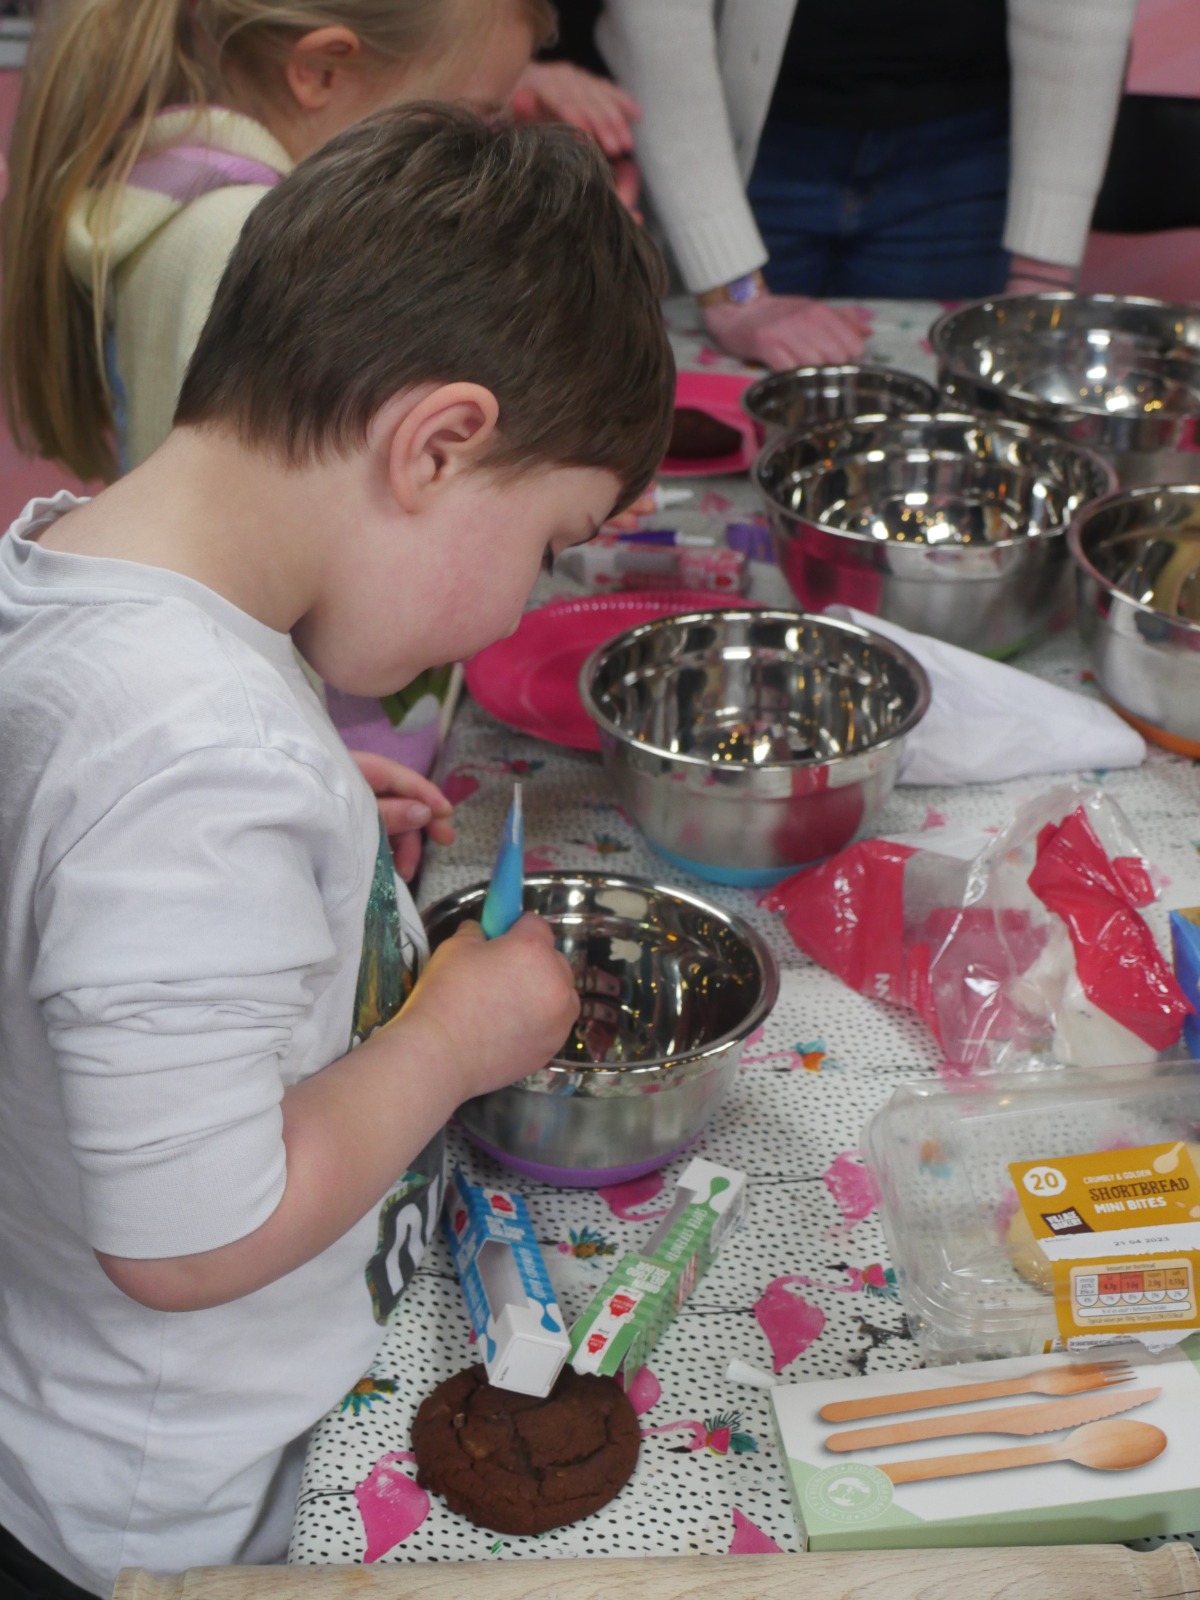 Child squirting food colouring into a bowl to mix icing.